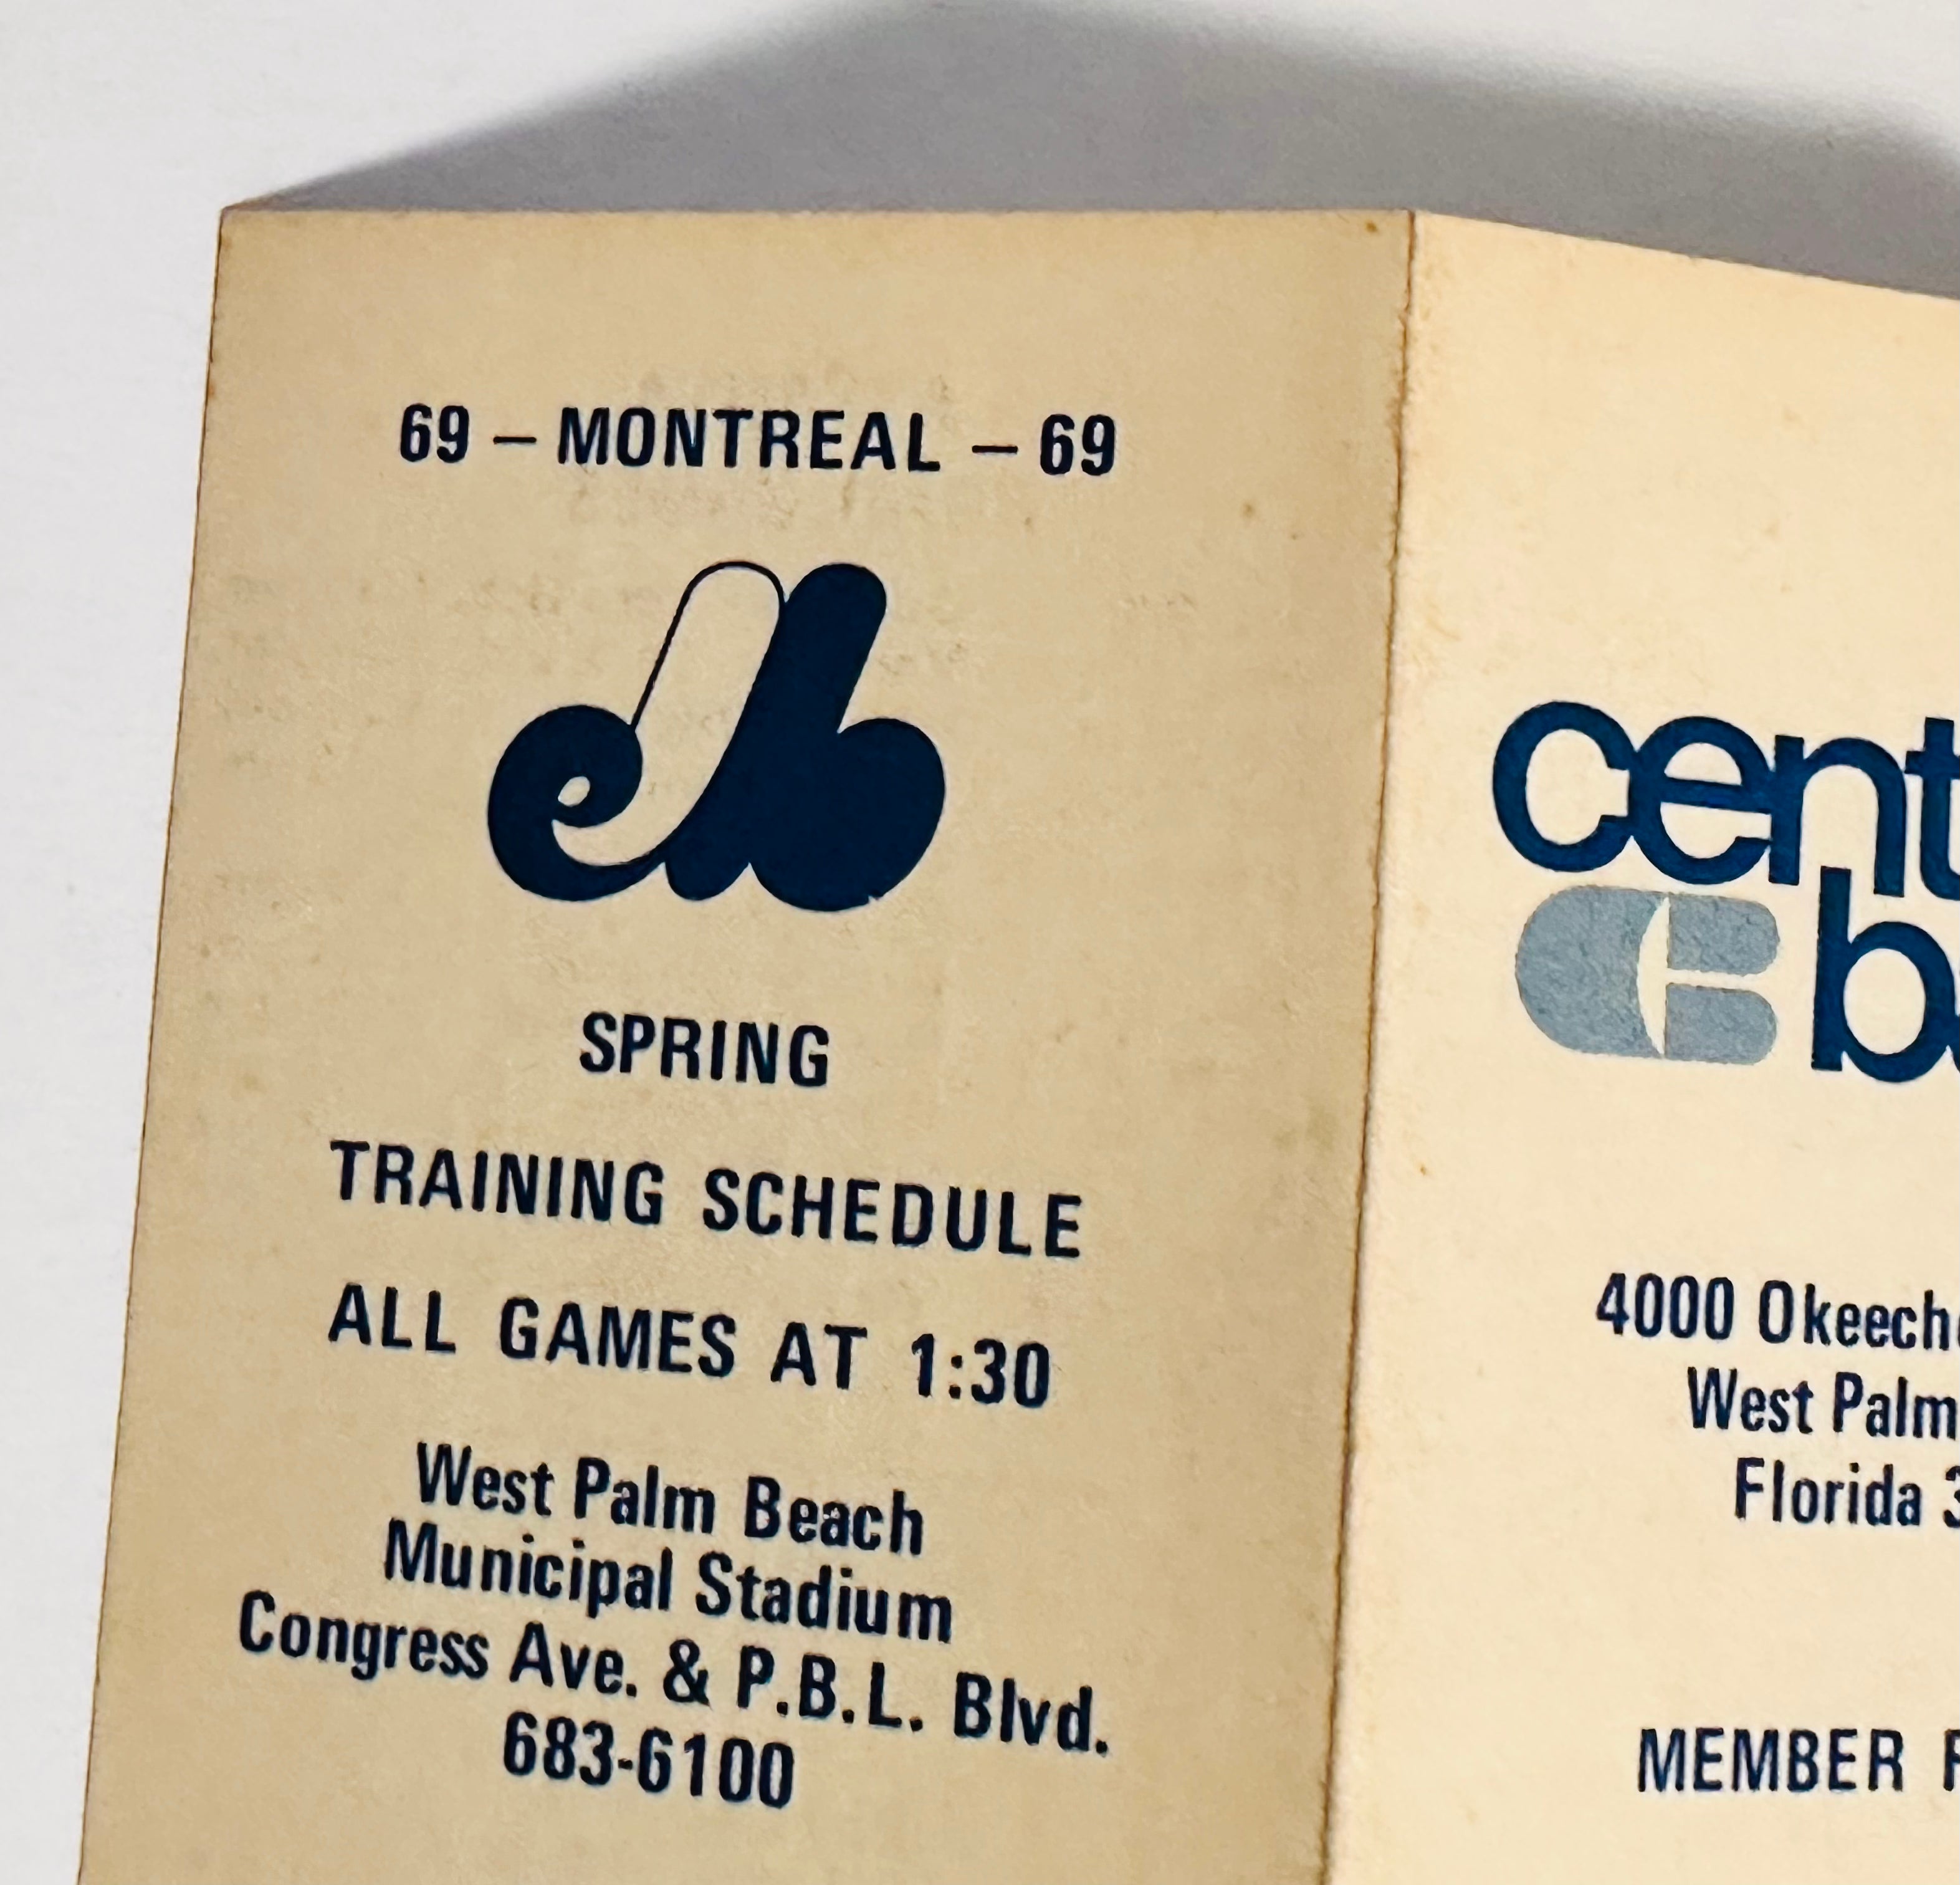 Montreal expos, rare inaugural, spring baseball schedule with Cleveland Indians, 1969